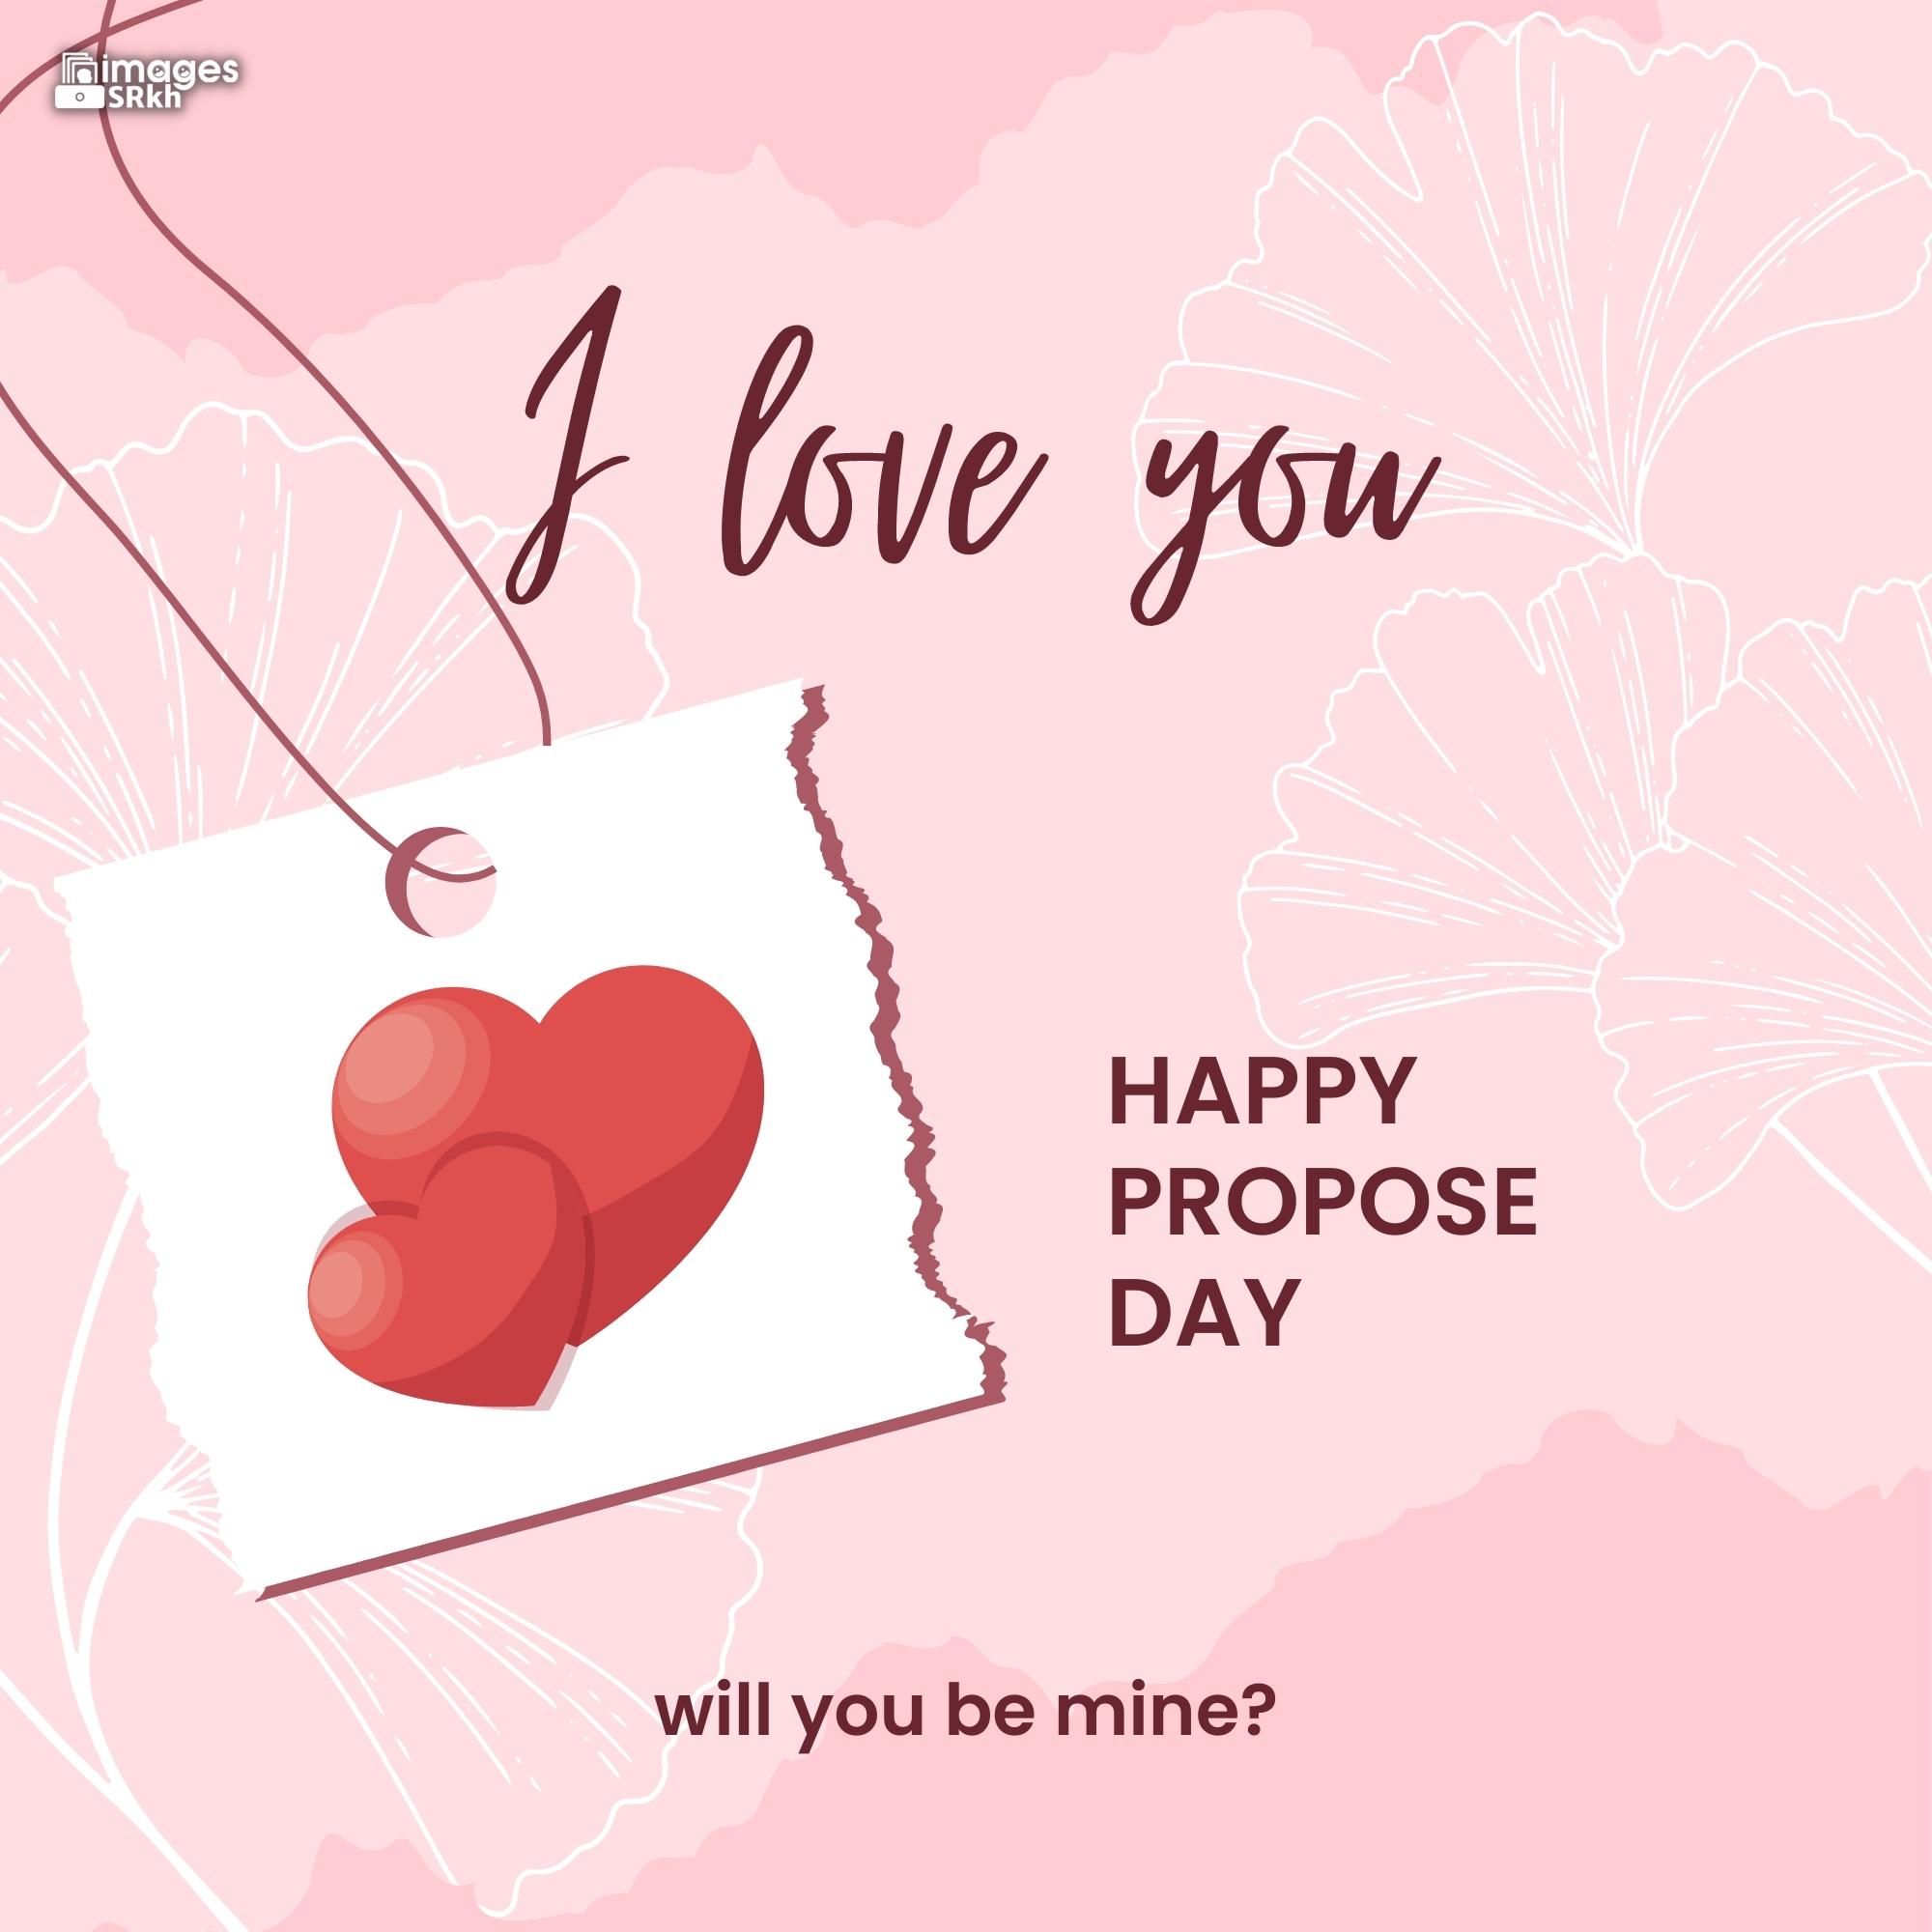 Happy Propose Day Images | 422 | I love you will you be mine